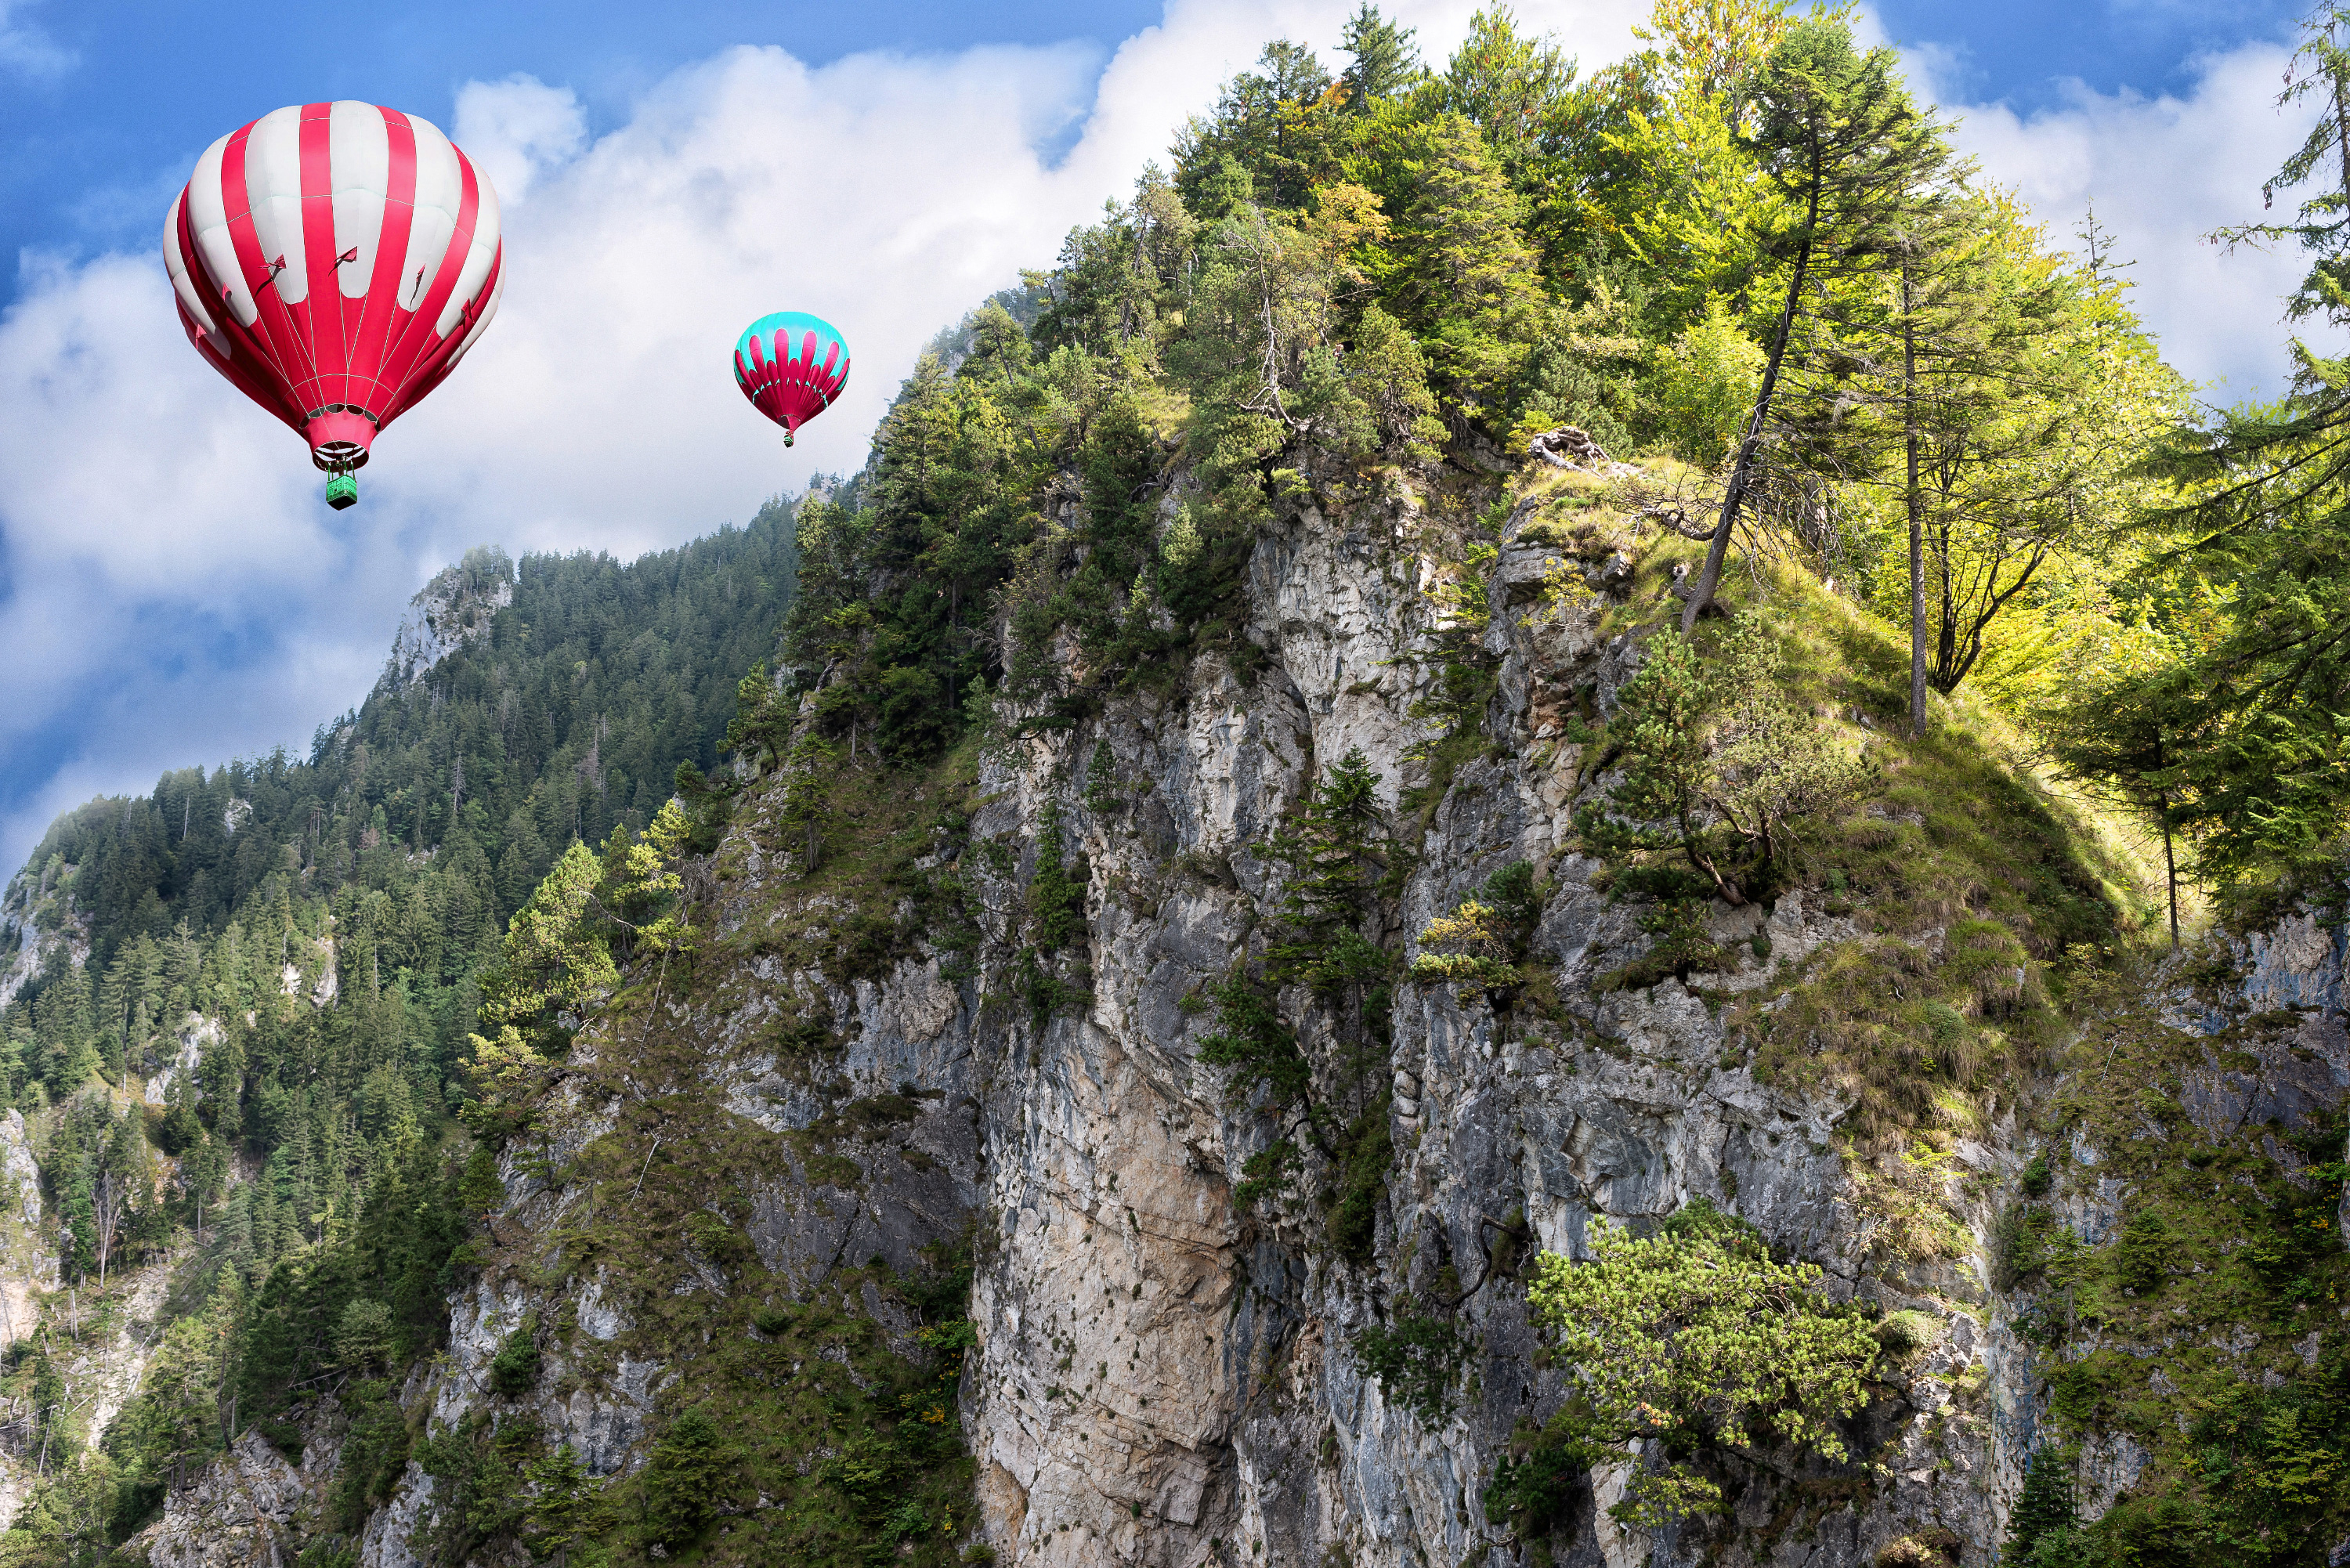 Red and white hot air balloons on background of high Alps mountains wth green forest under blue cloudy sky.